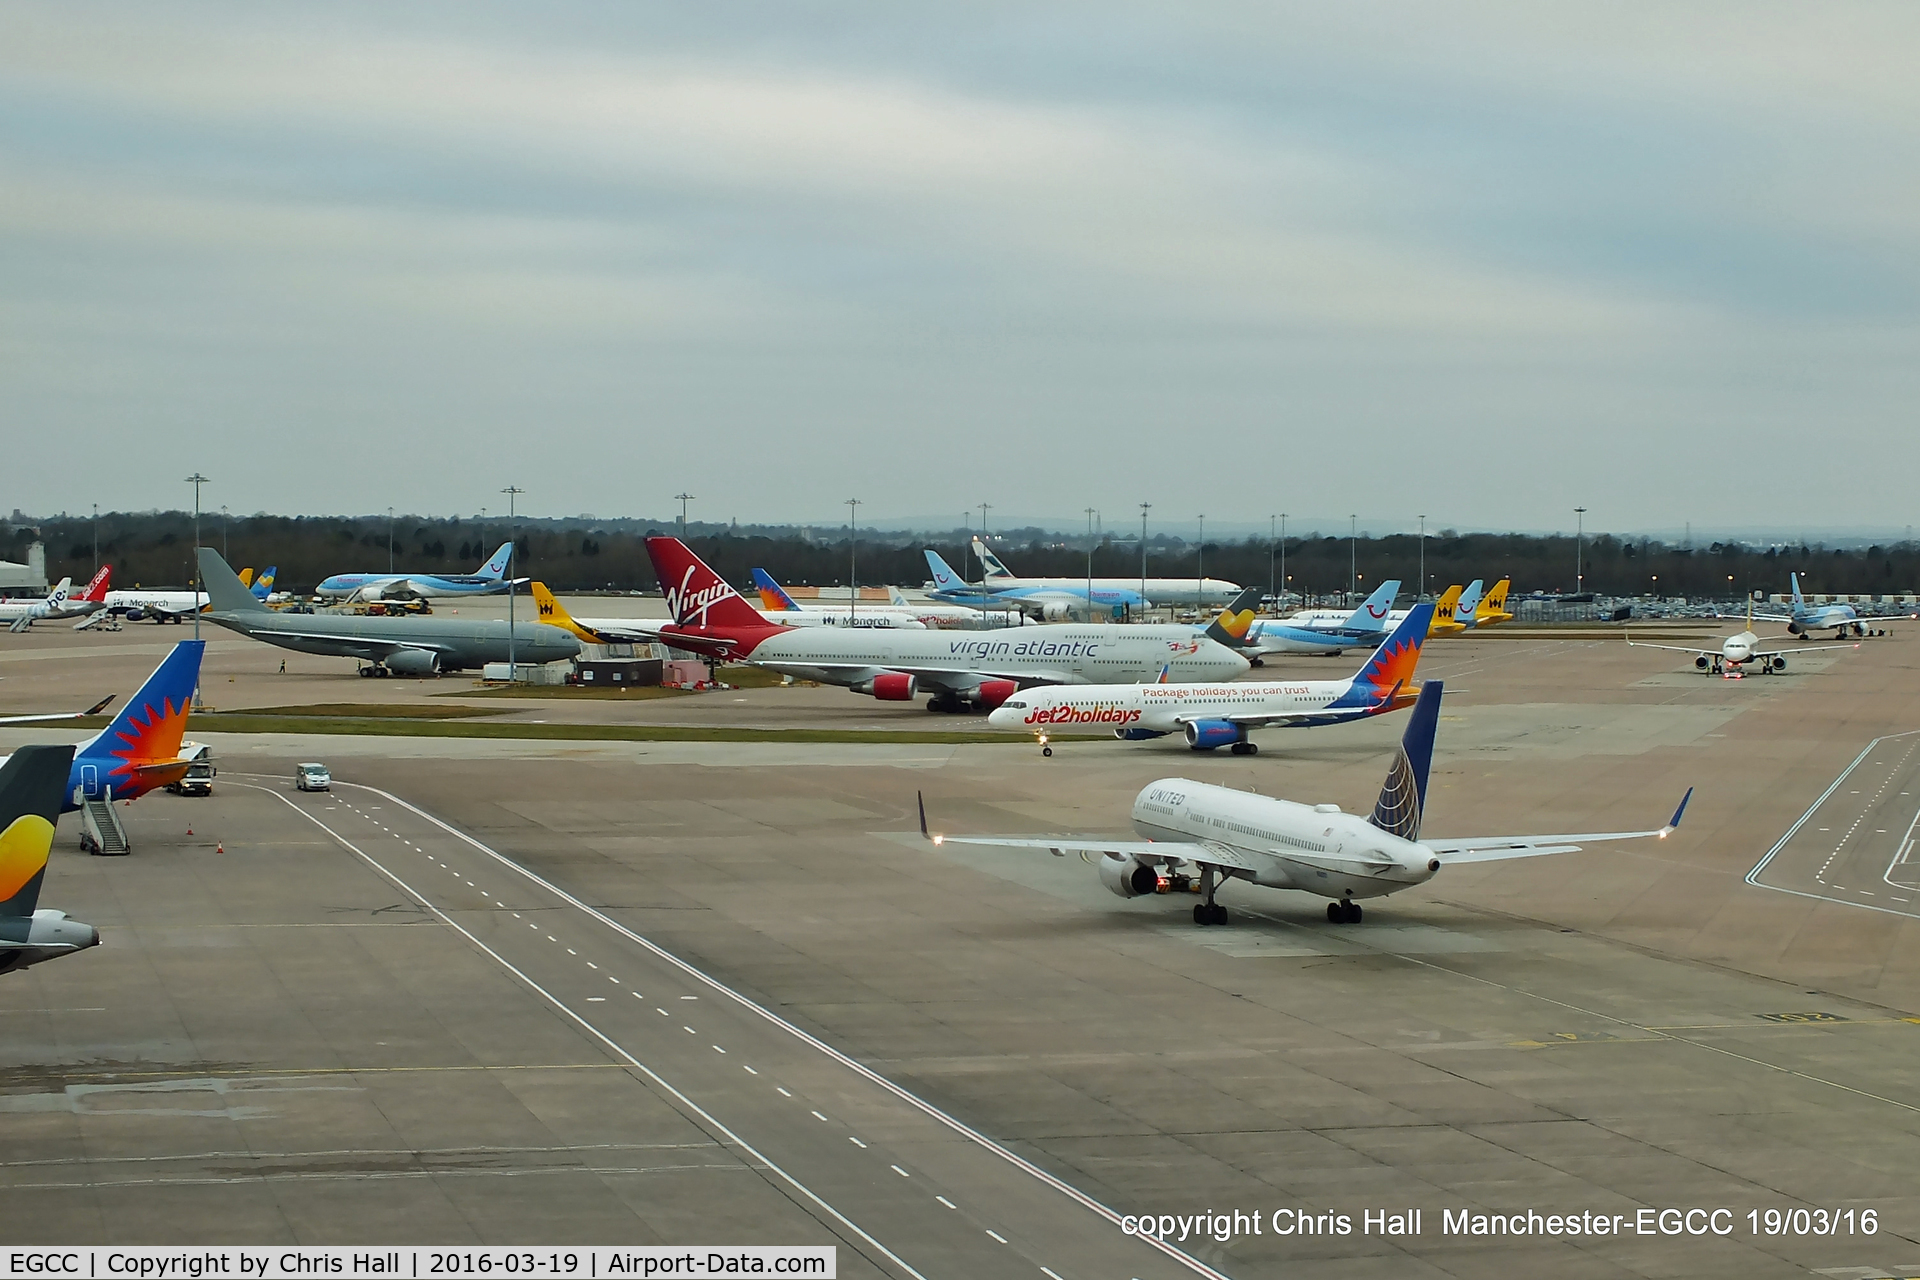 Manchester Airport, Manchester, England United Kingdom (EGCC) - Terminal 2 remote stands